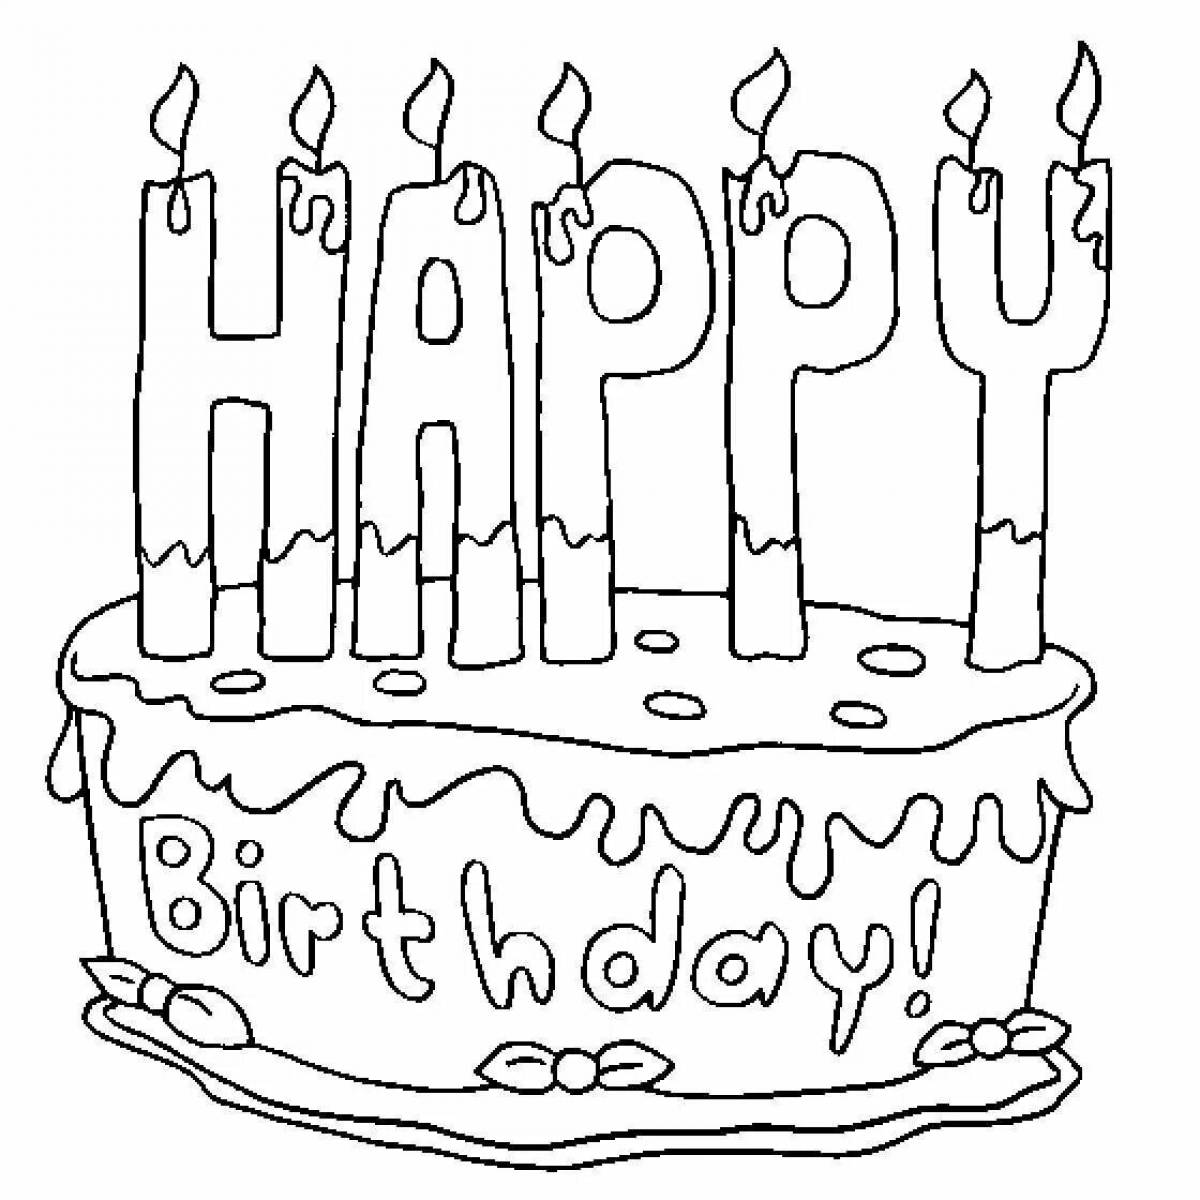 Festive birthday lung coloring page